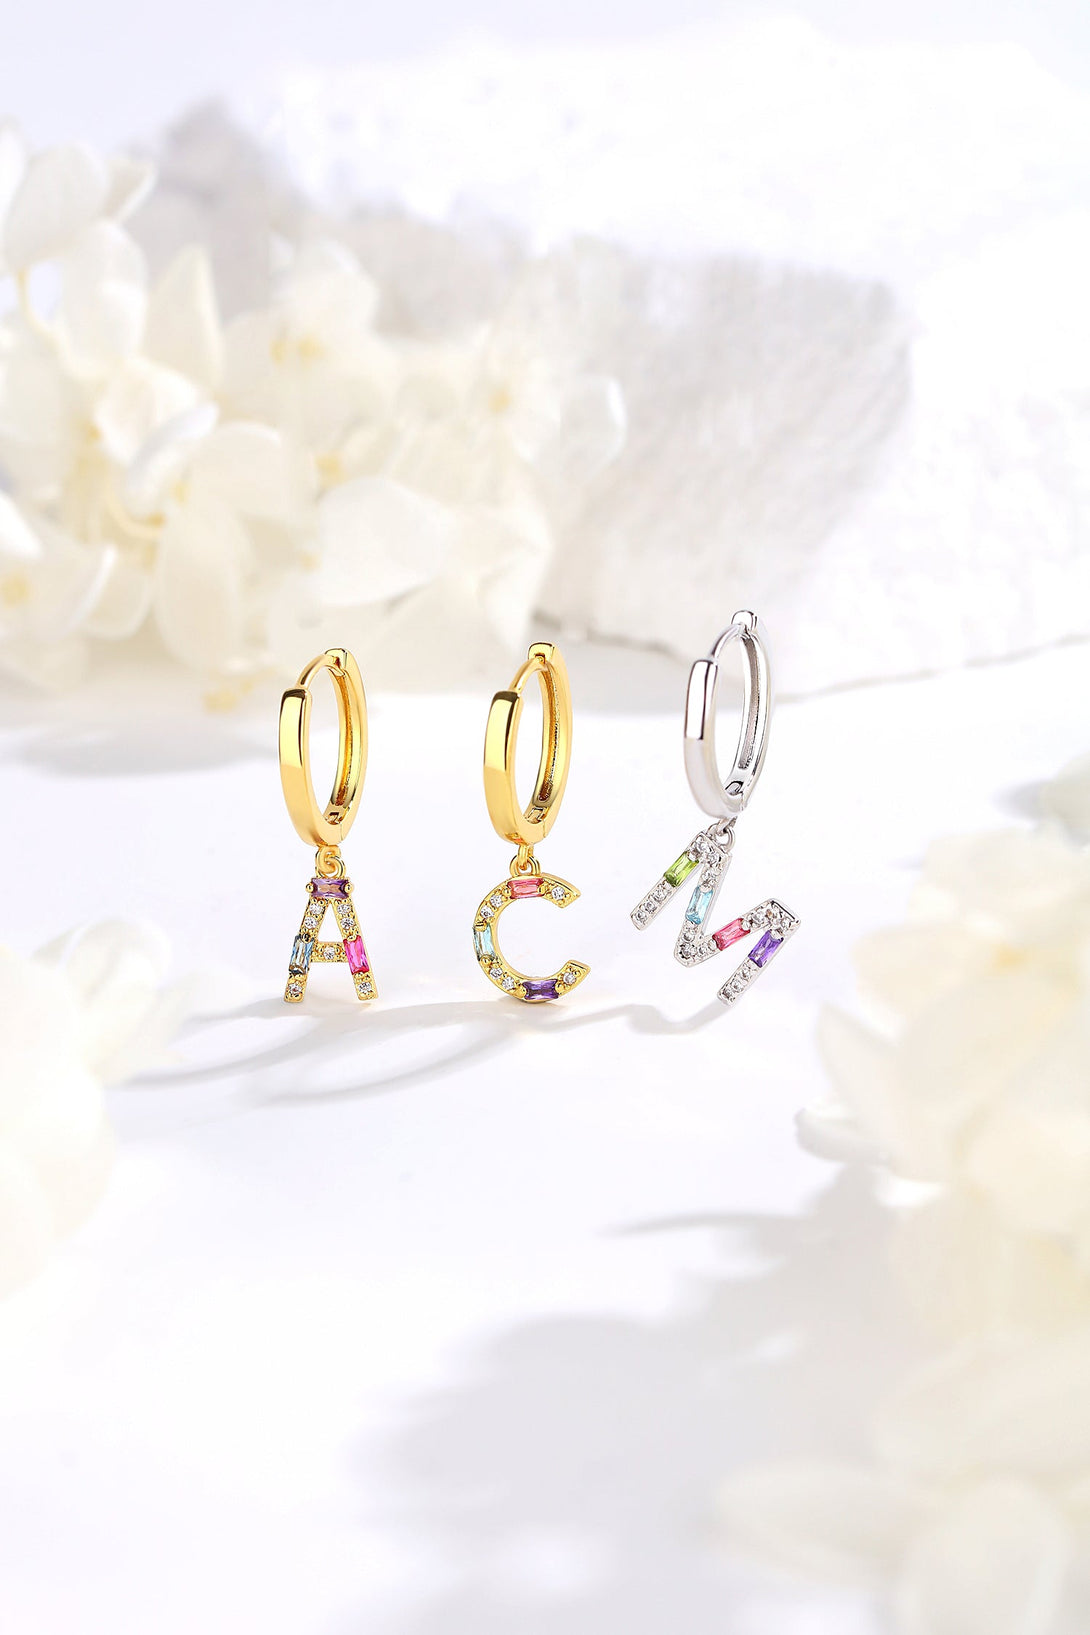 Single Gold Pavé Initial Charm Drop Huggie Hoop Earring-Letter R - Classicharms